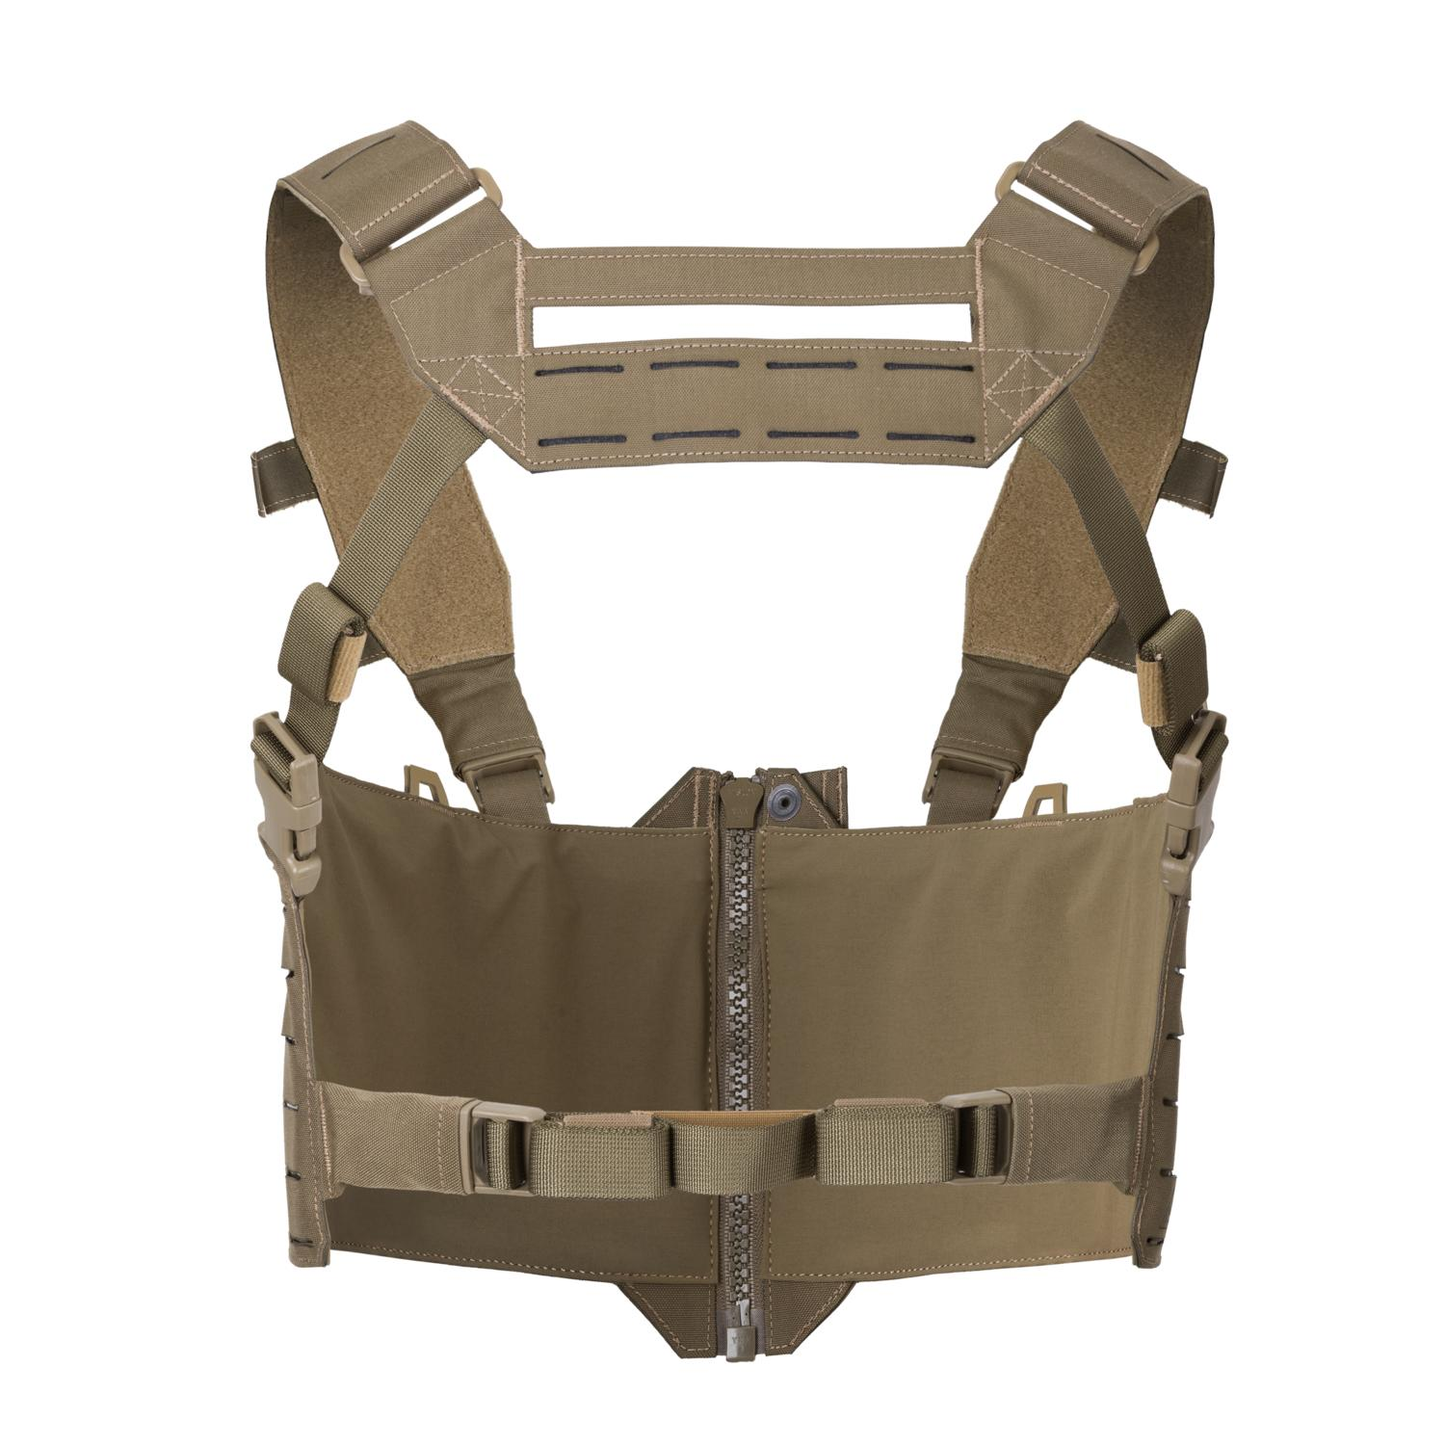 DIRECT ACTION BASE TATTICO VEST SF WARWICK ZIP FRONT CHEST RIG - COYOTE BROWN CB